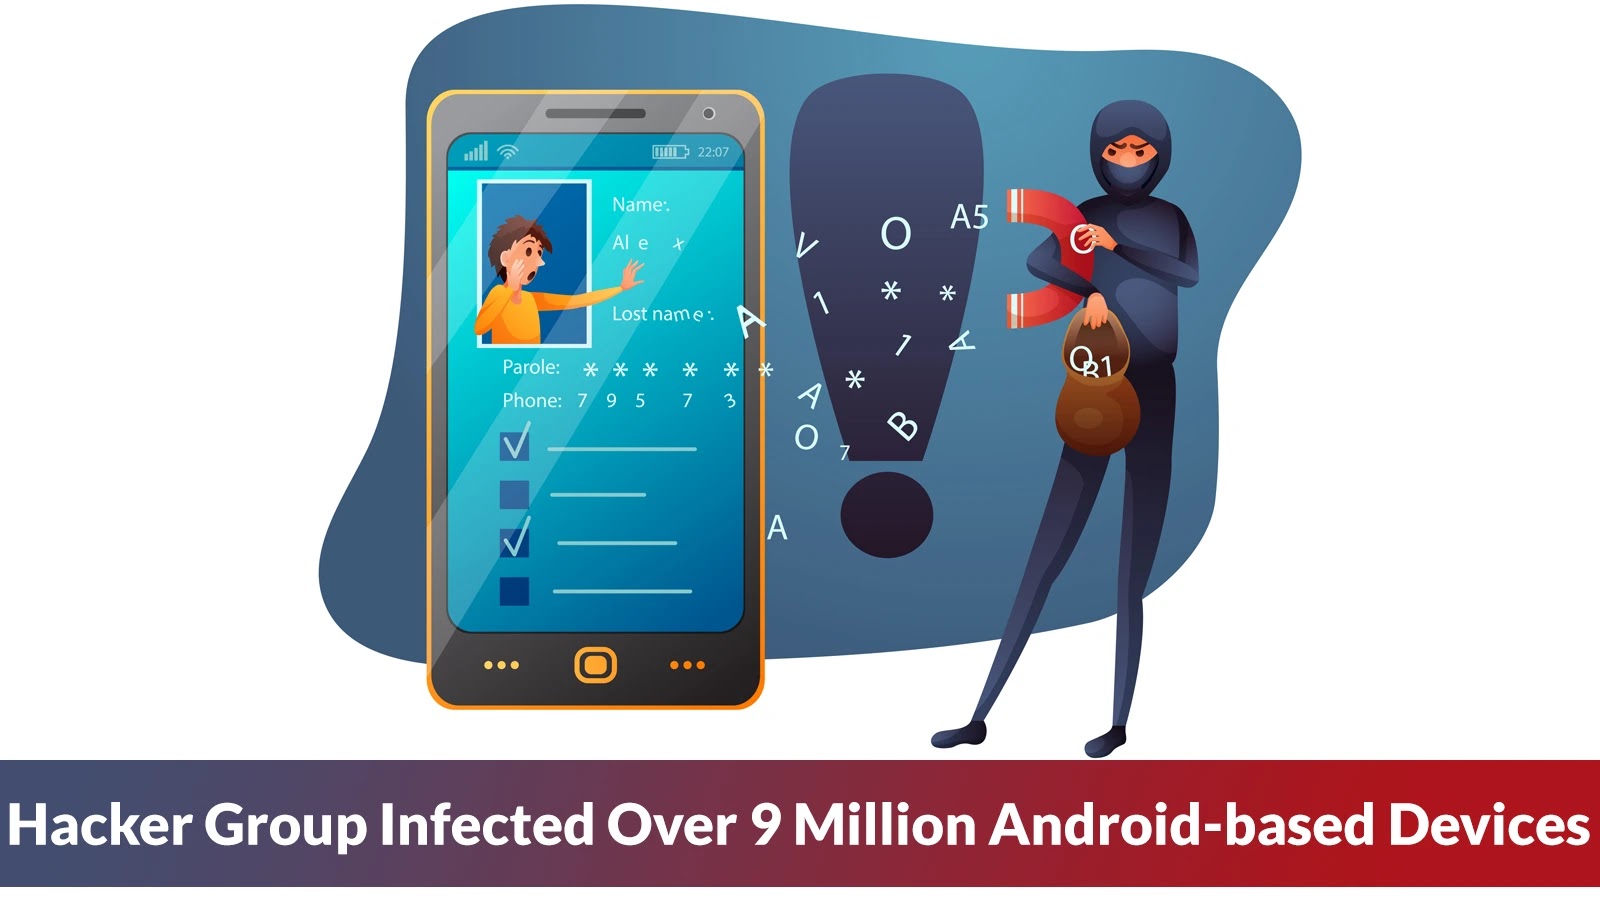 Triada Trojan (Android) - Malware removal instructions (updated)